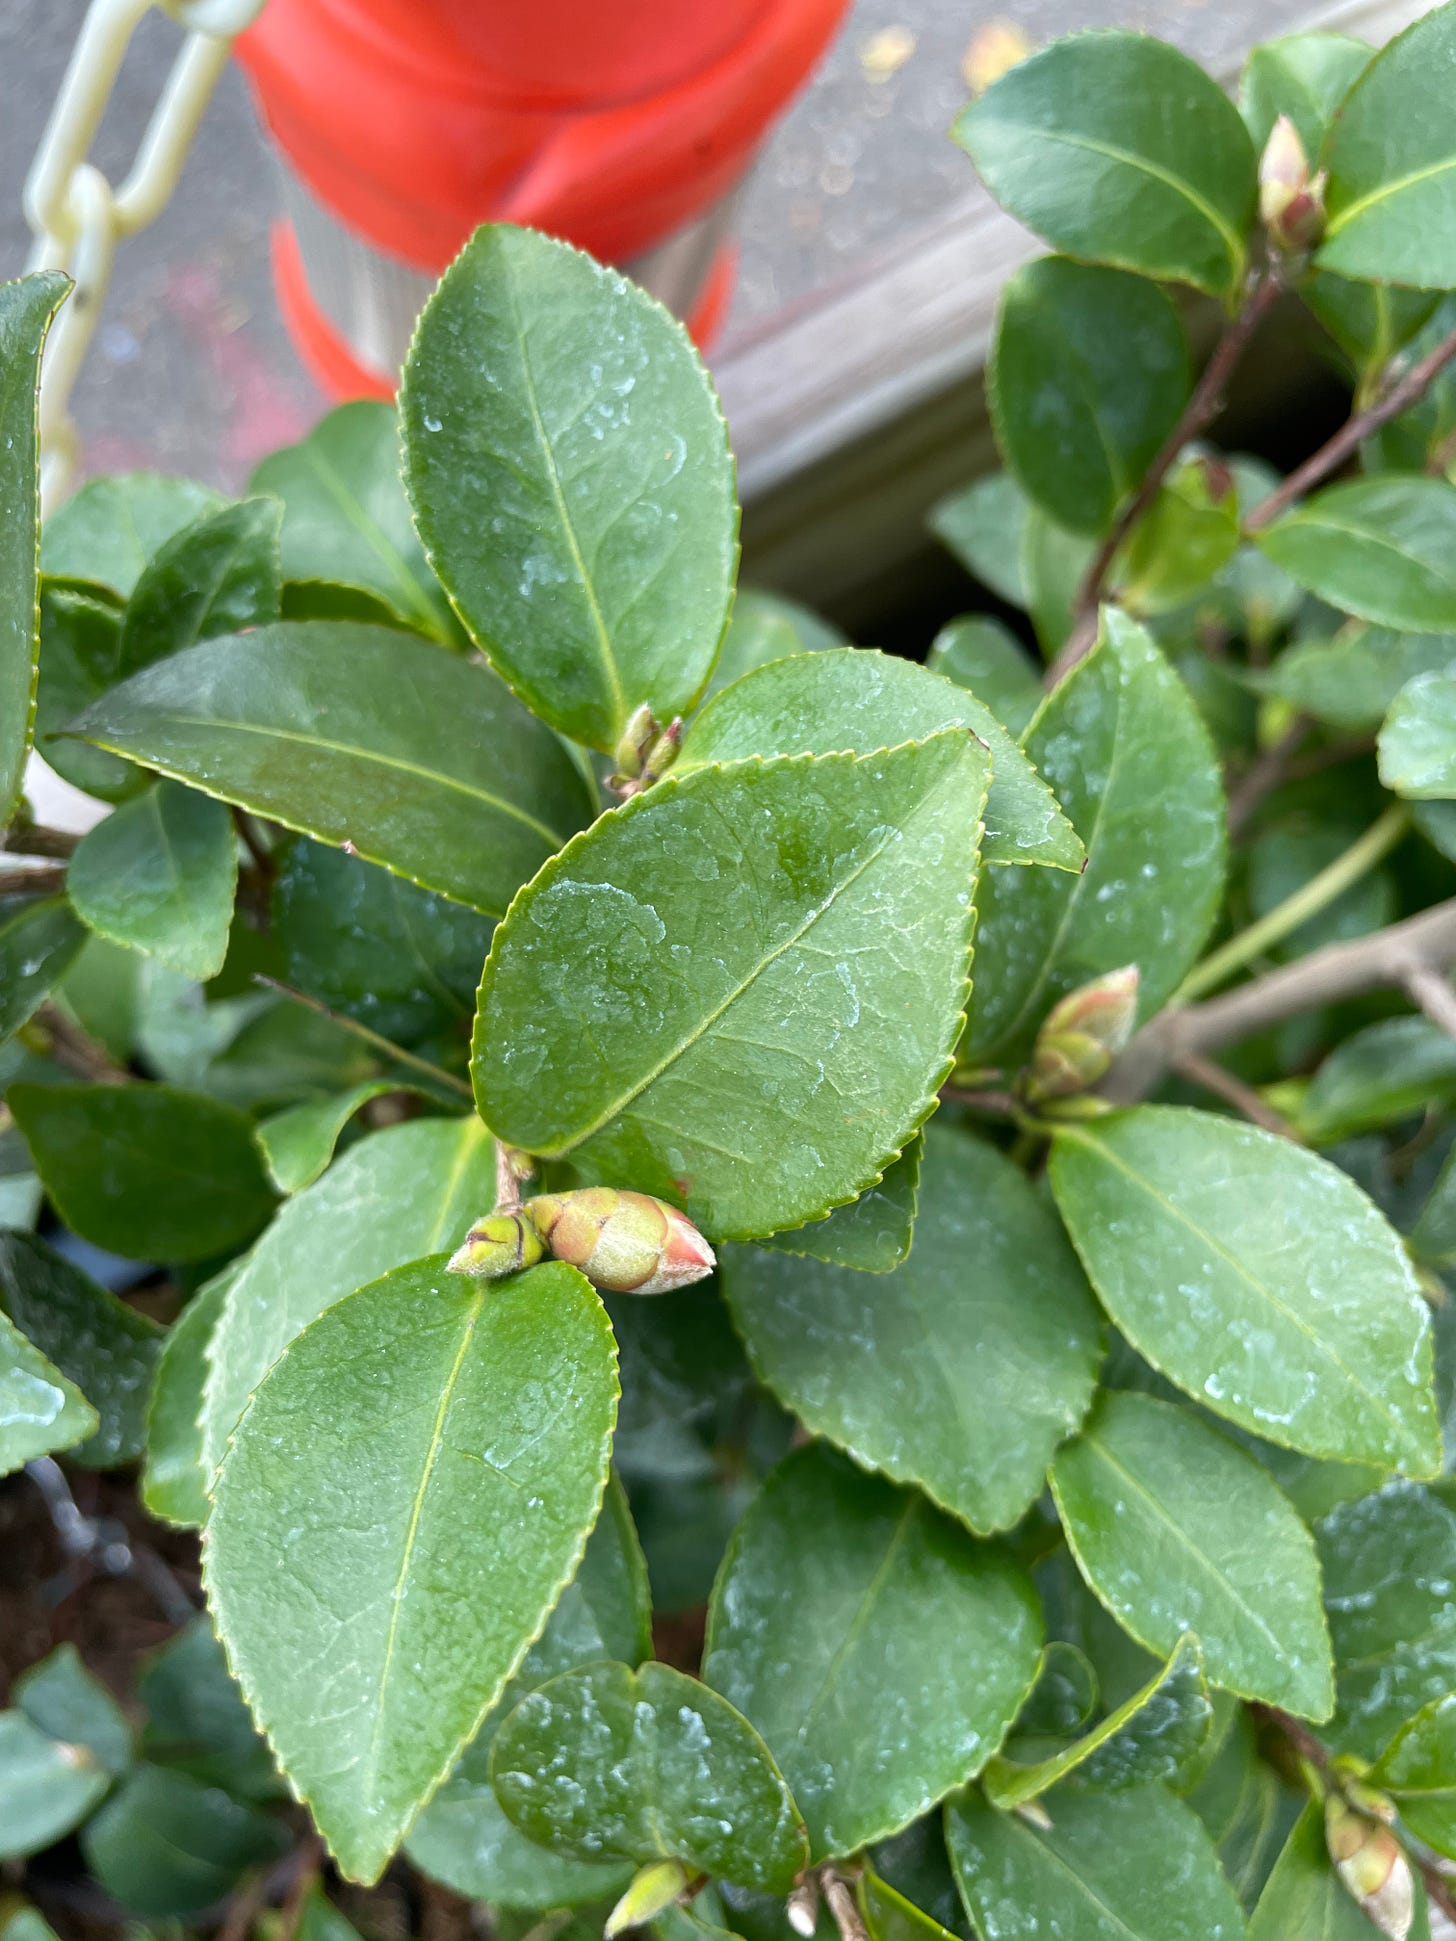 ID: Close photo of Camellia foliage and football shaped flower buds tinged red